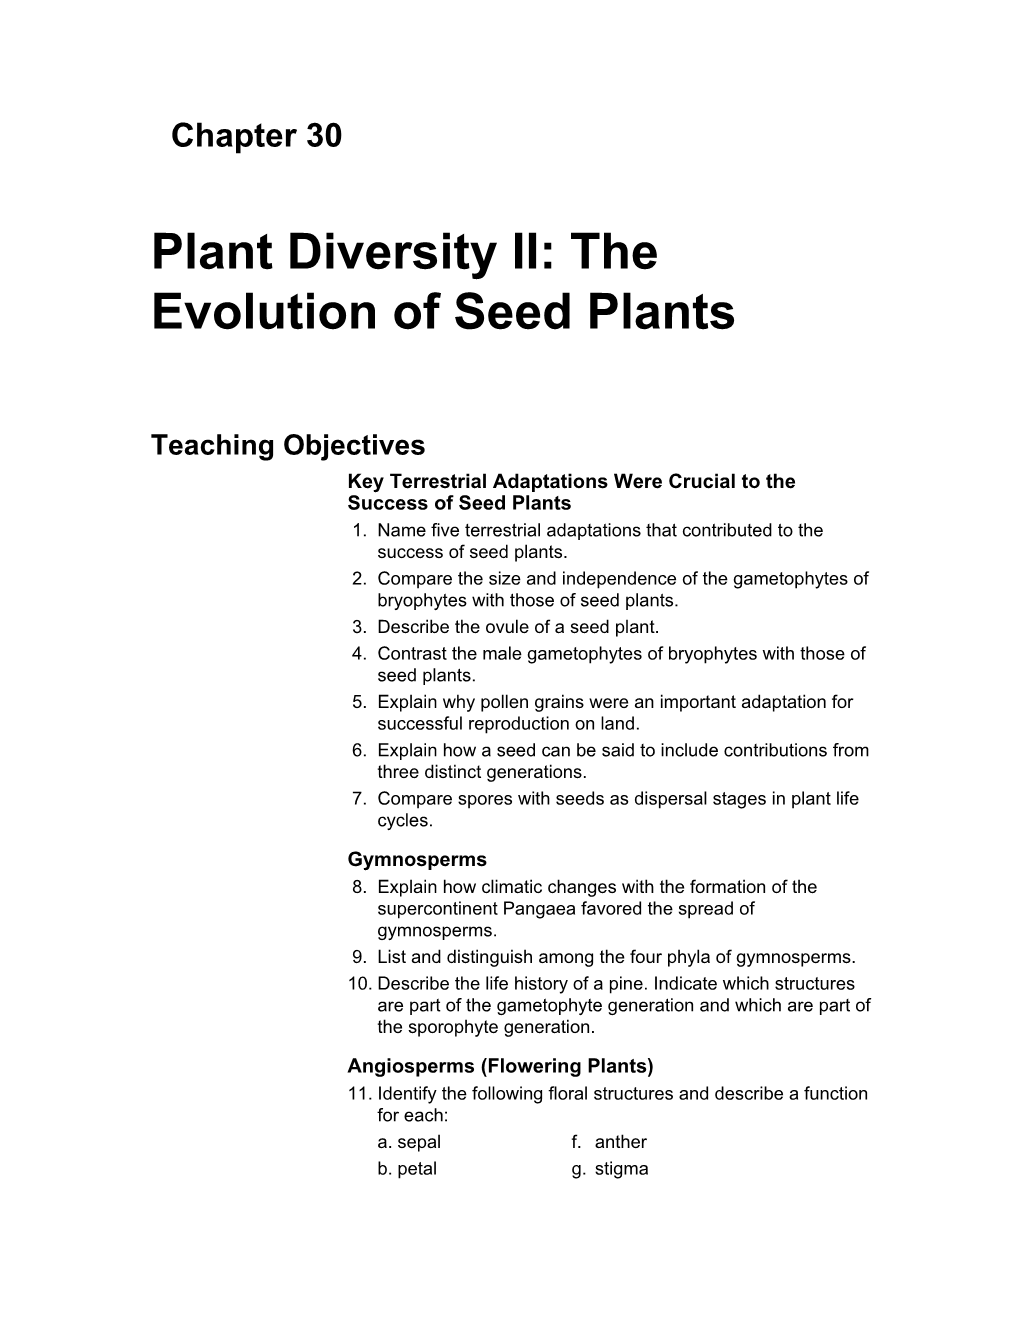 Plant Diversity II: the Evolution of Seed Plants